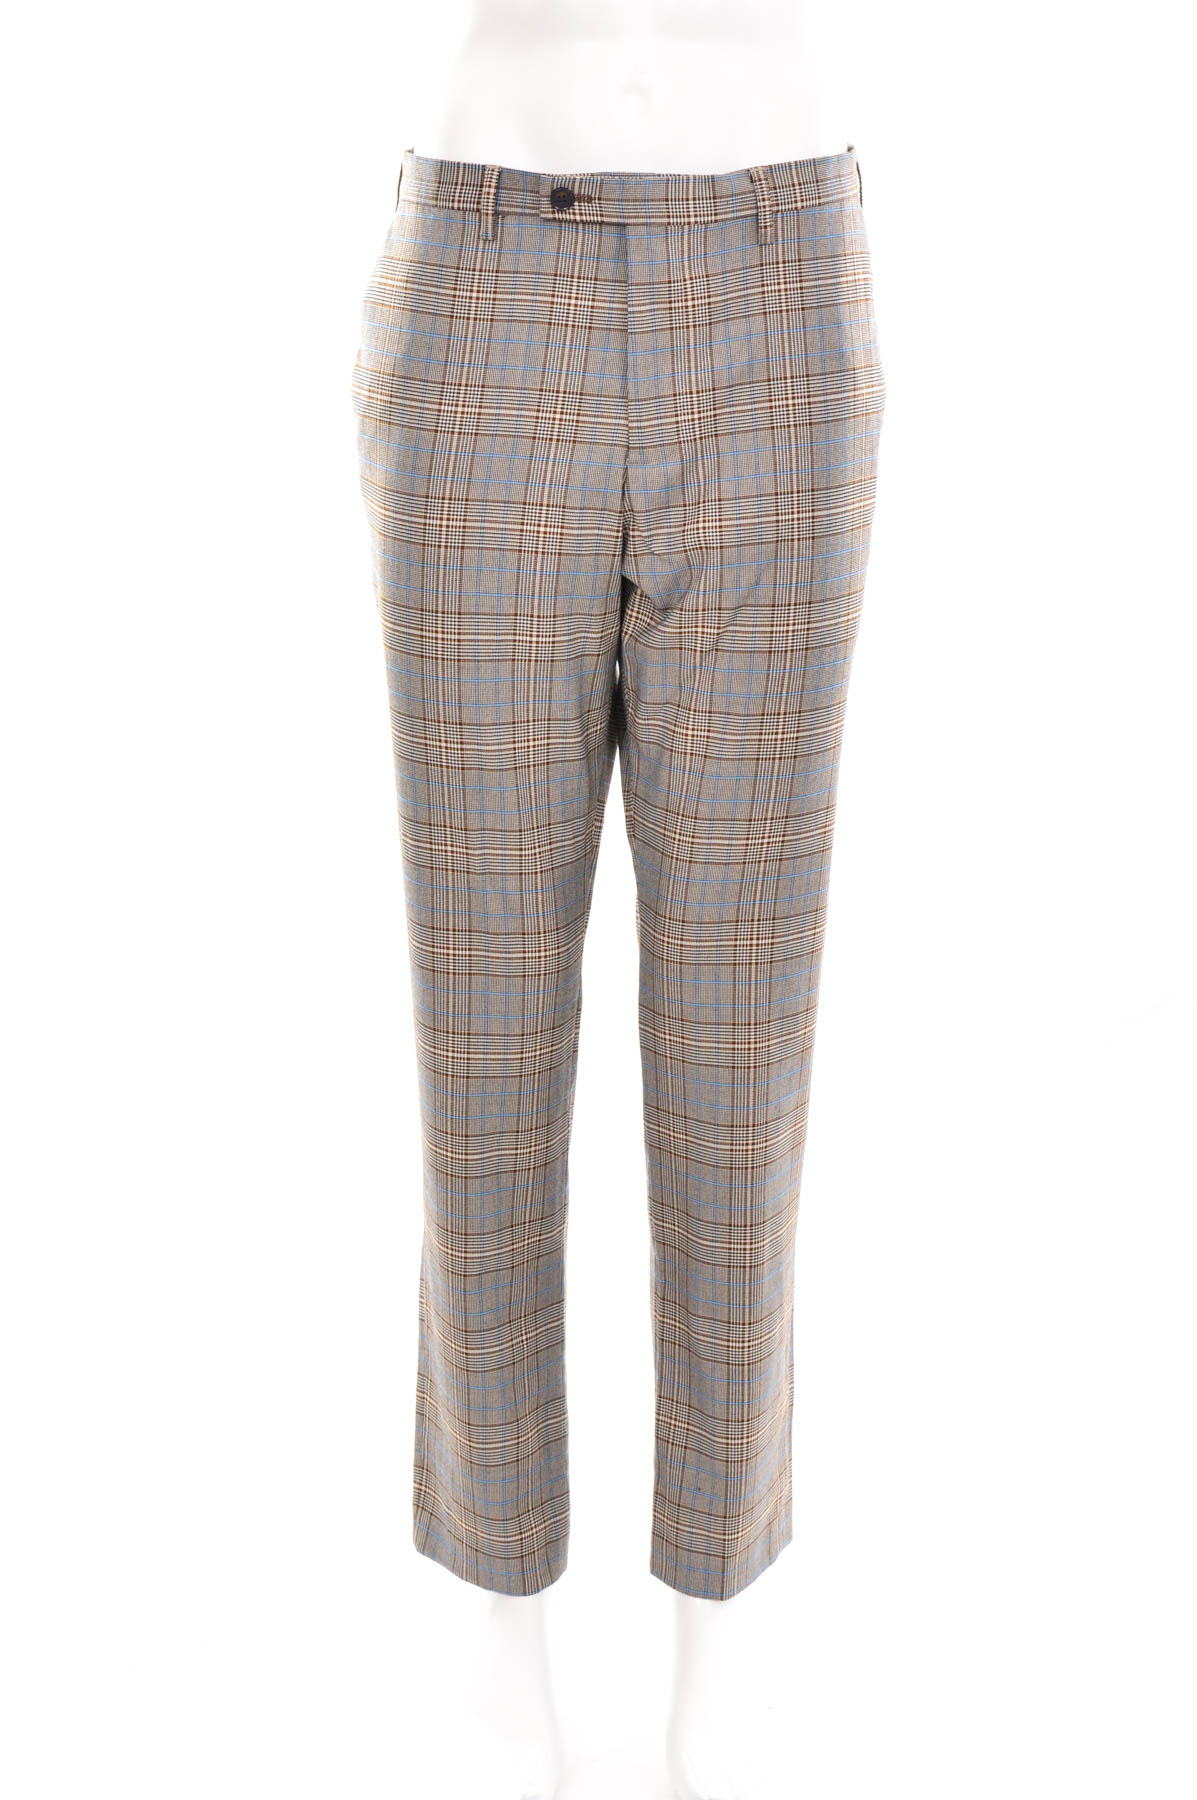 Men's trousers - Angelo Litrico - 0